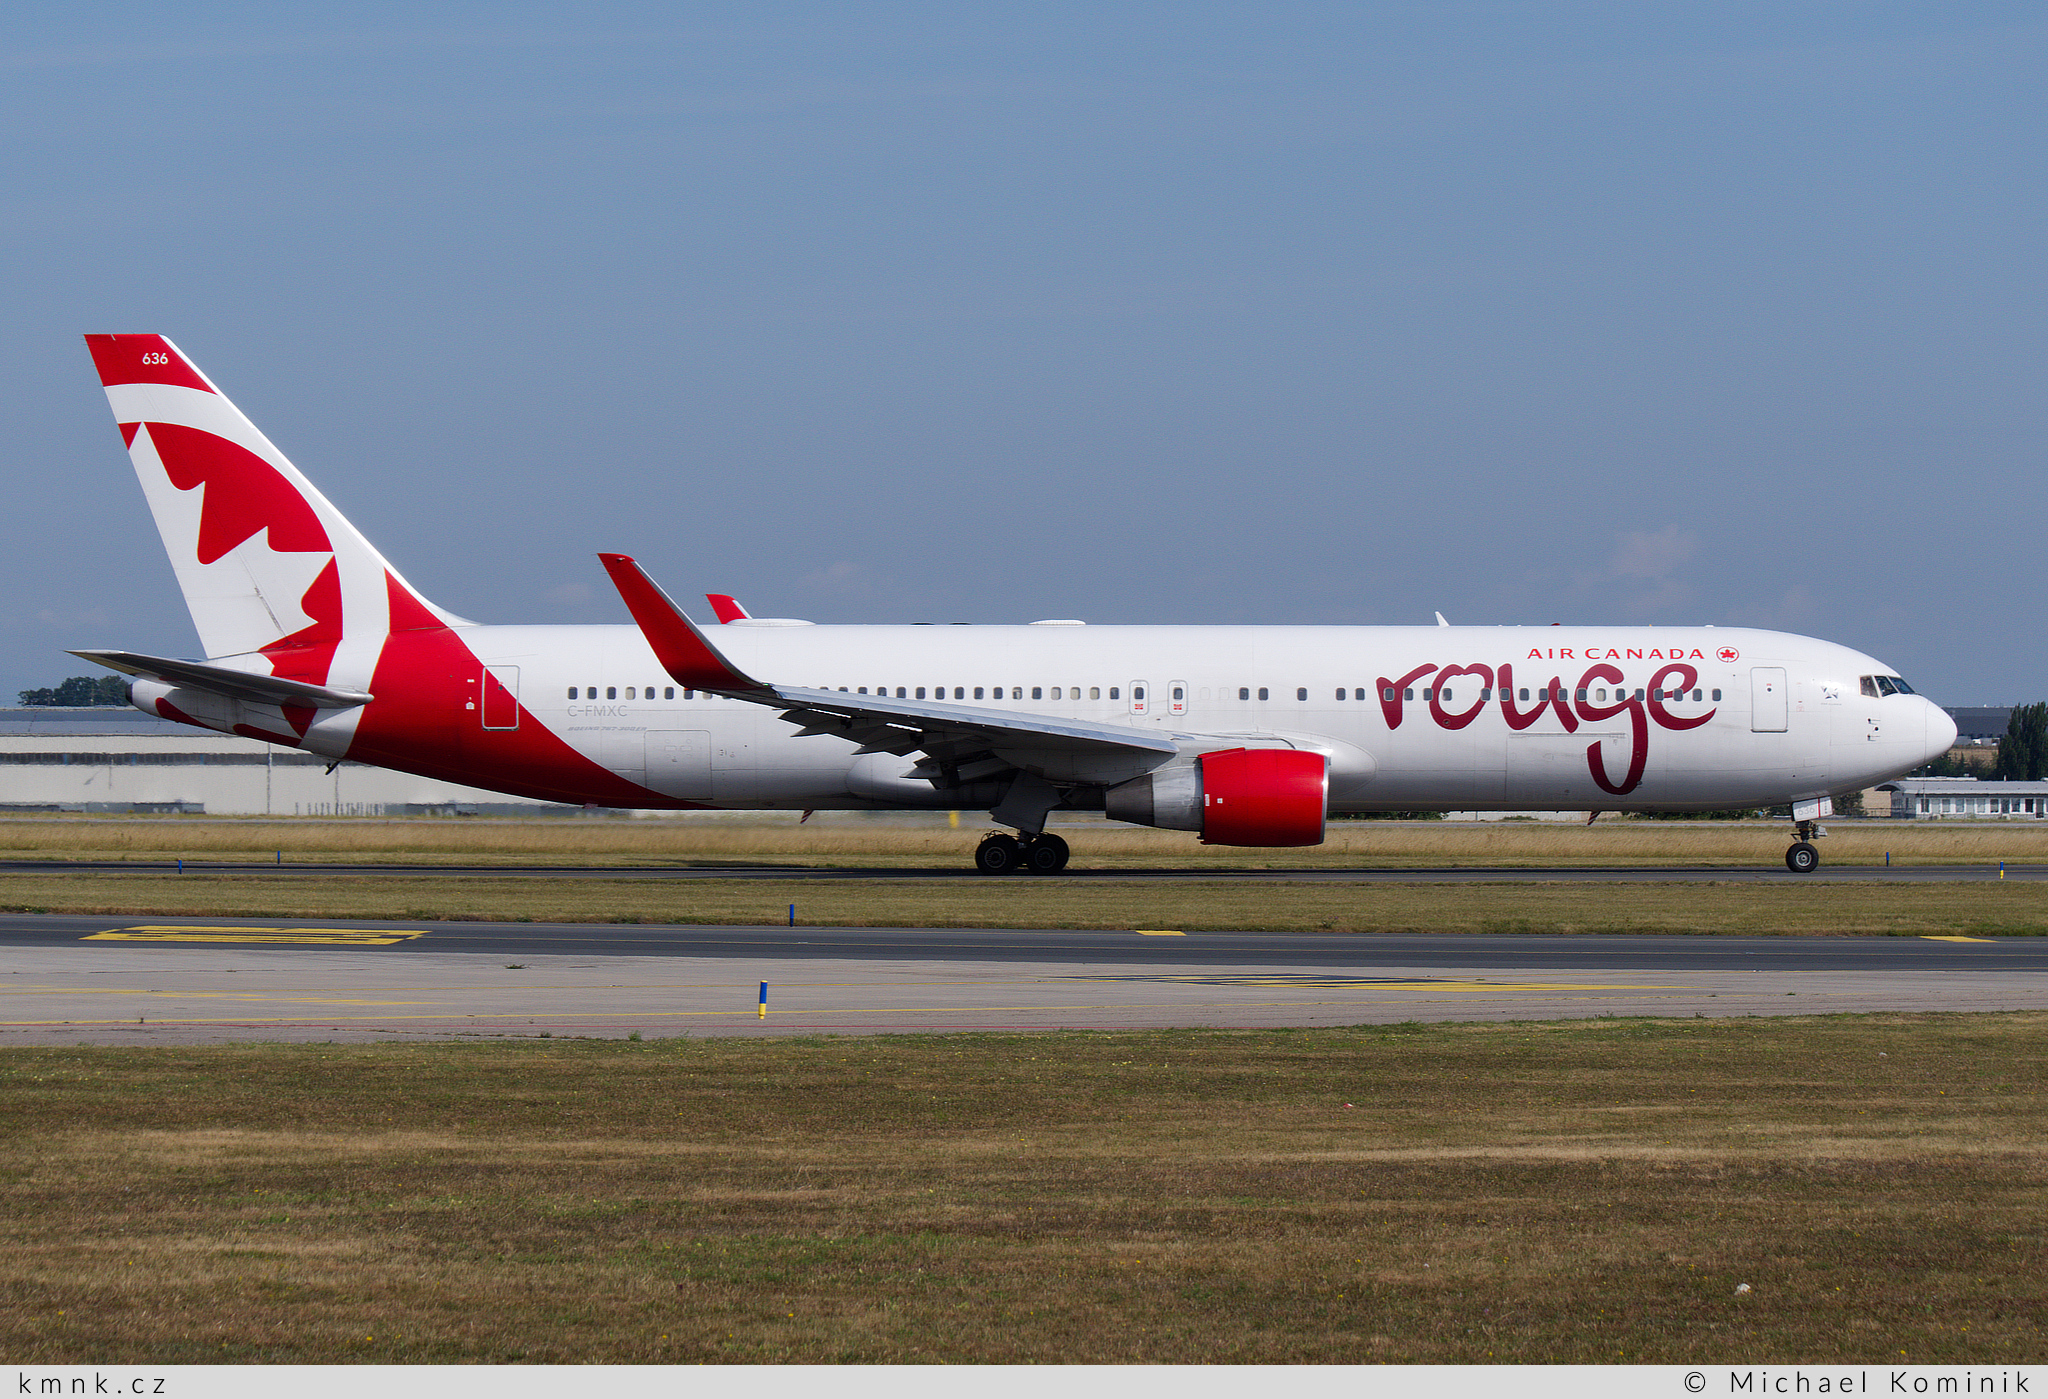 Air Canada Rouge | Boeing 767-333ER | C-FMXC